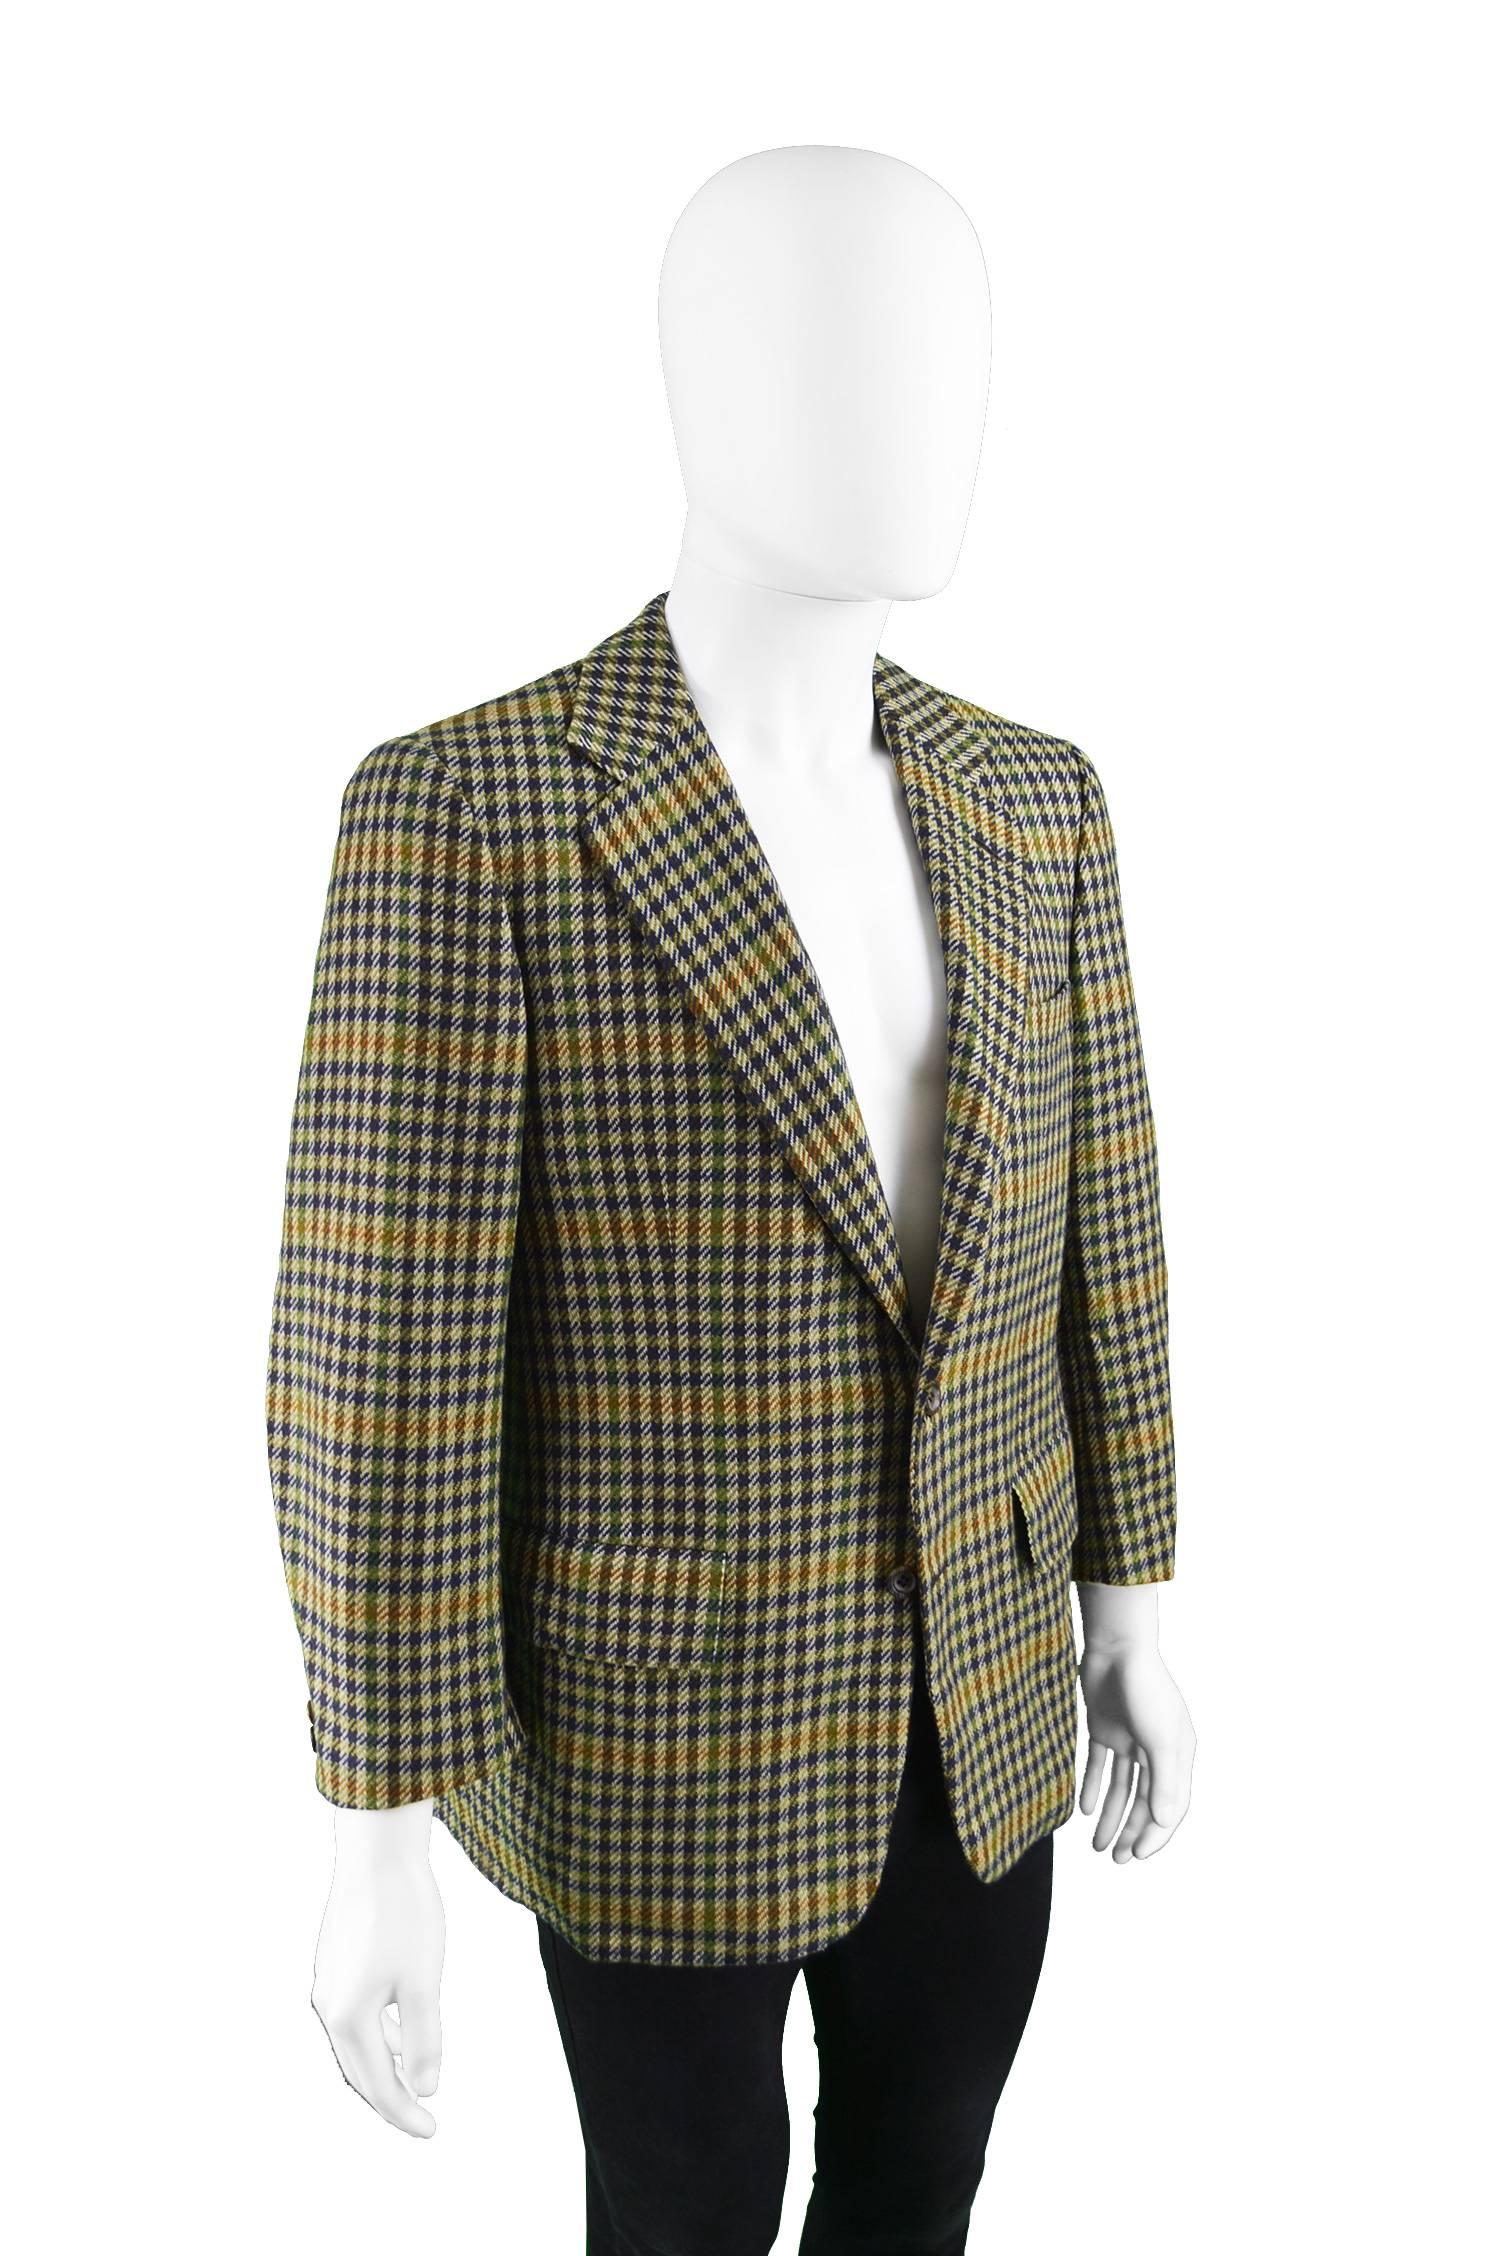 Chester Barrie for Harrods Men's Vintage Pure Cashmere Checked Jacket, 1970s For Sale 2